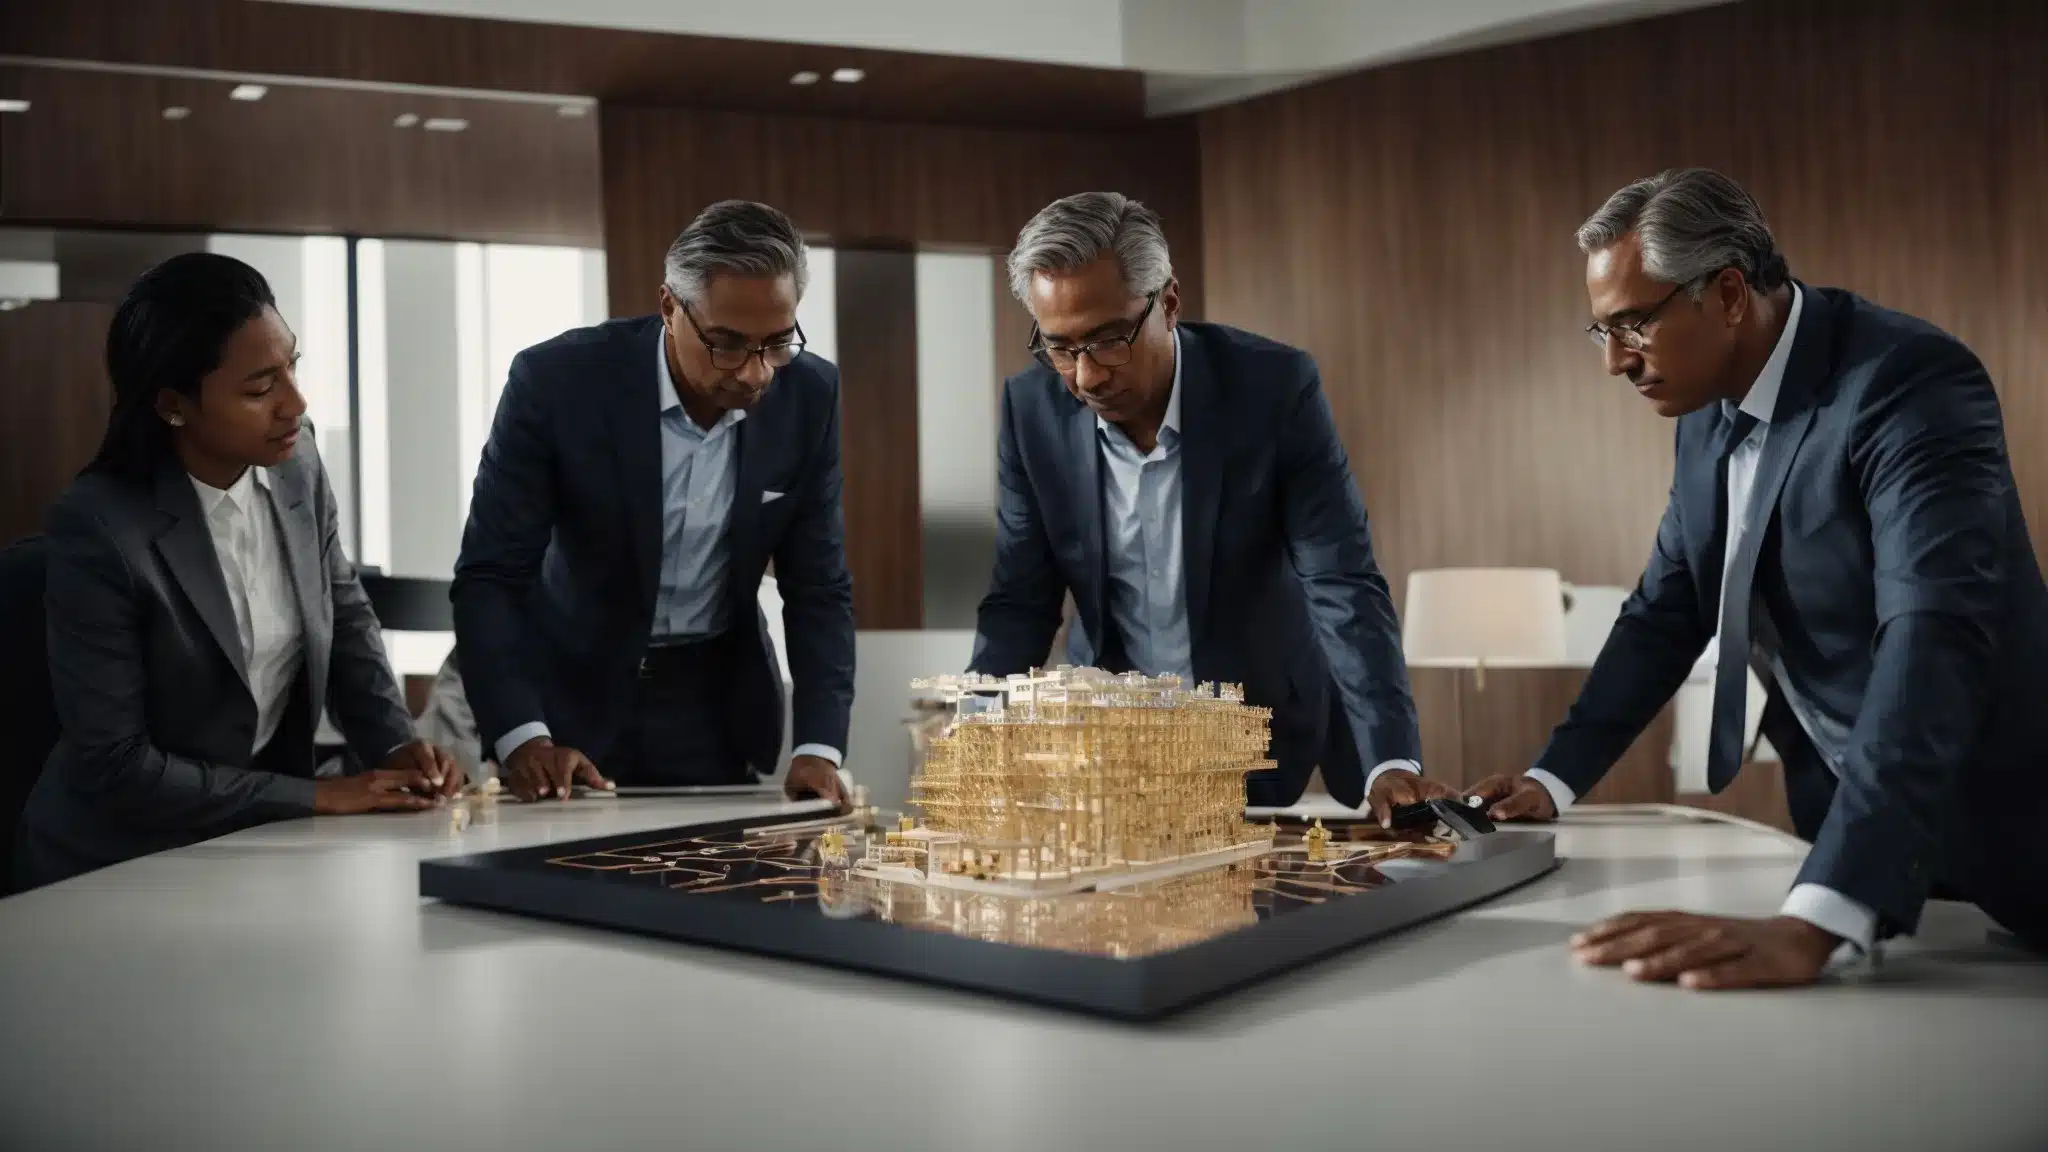 A Group Of Executives Brainstorming Around A Unique 3D Puzzle Structure On A Sleek Conference Table.